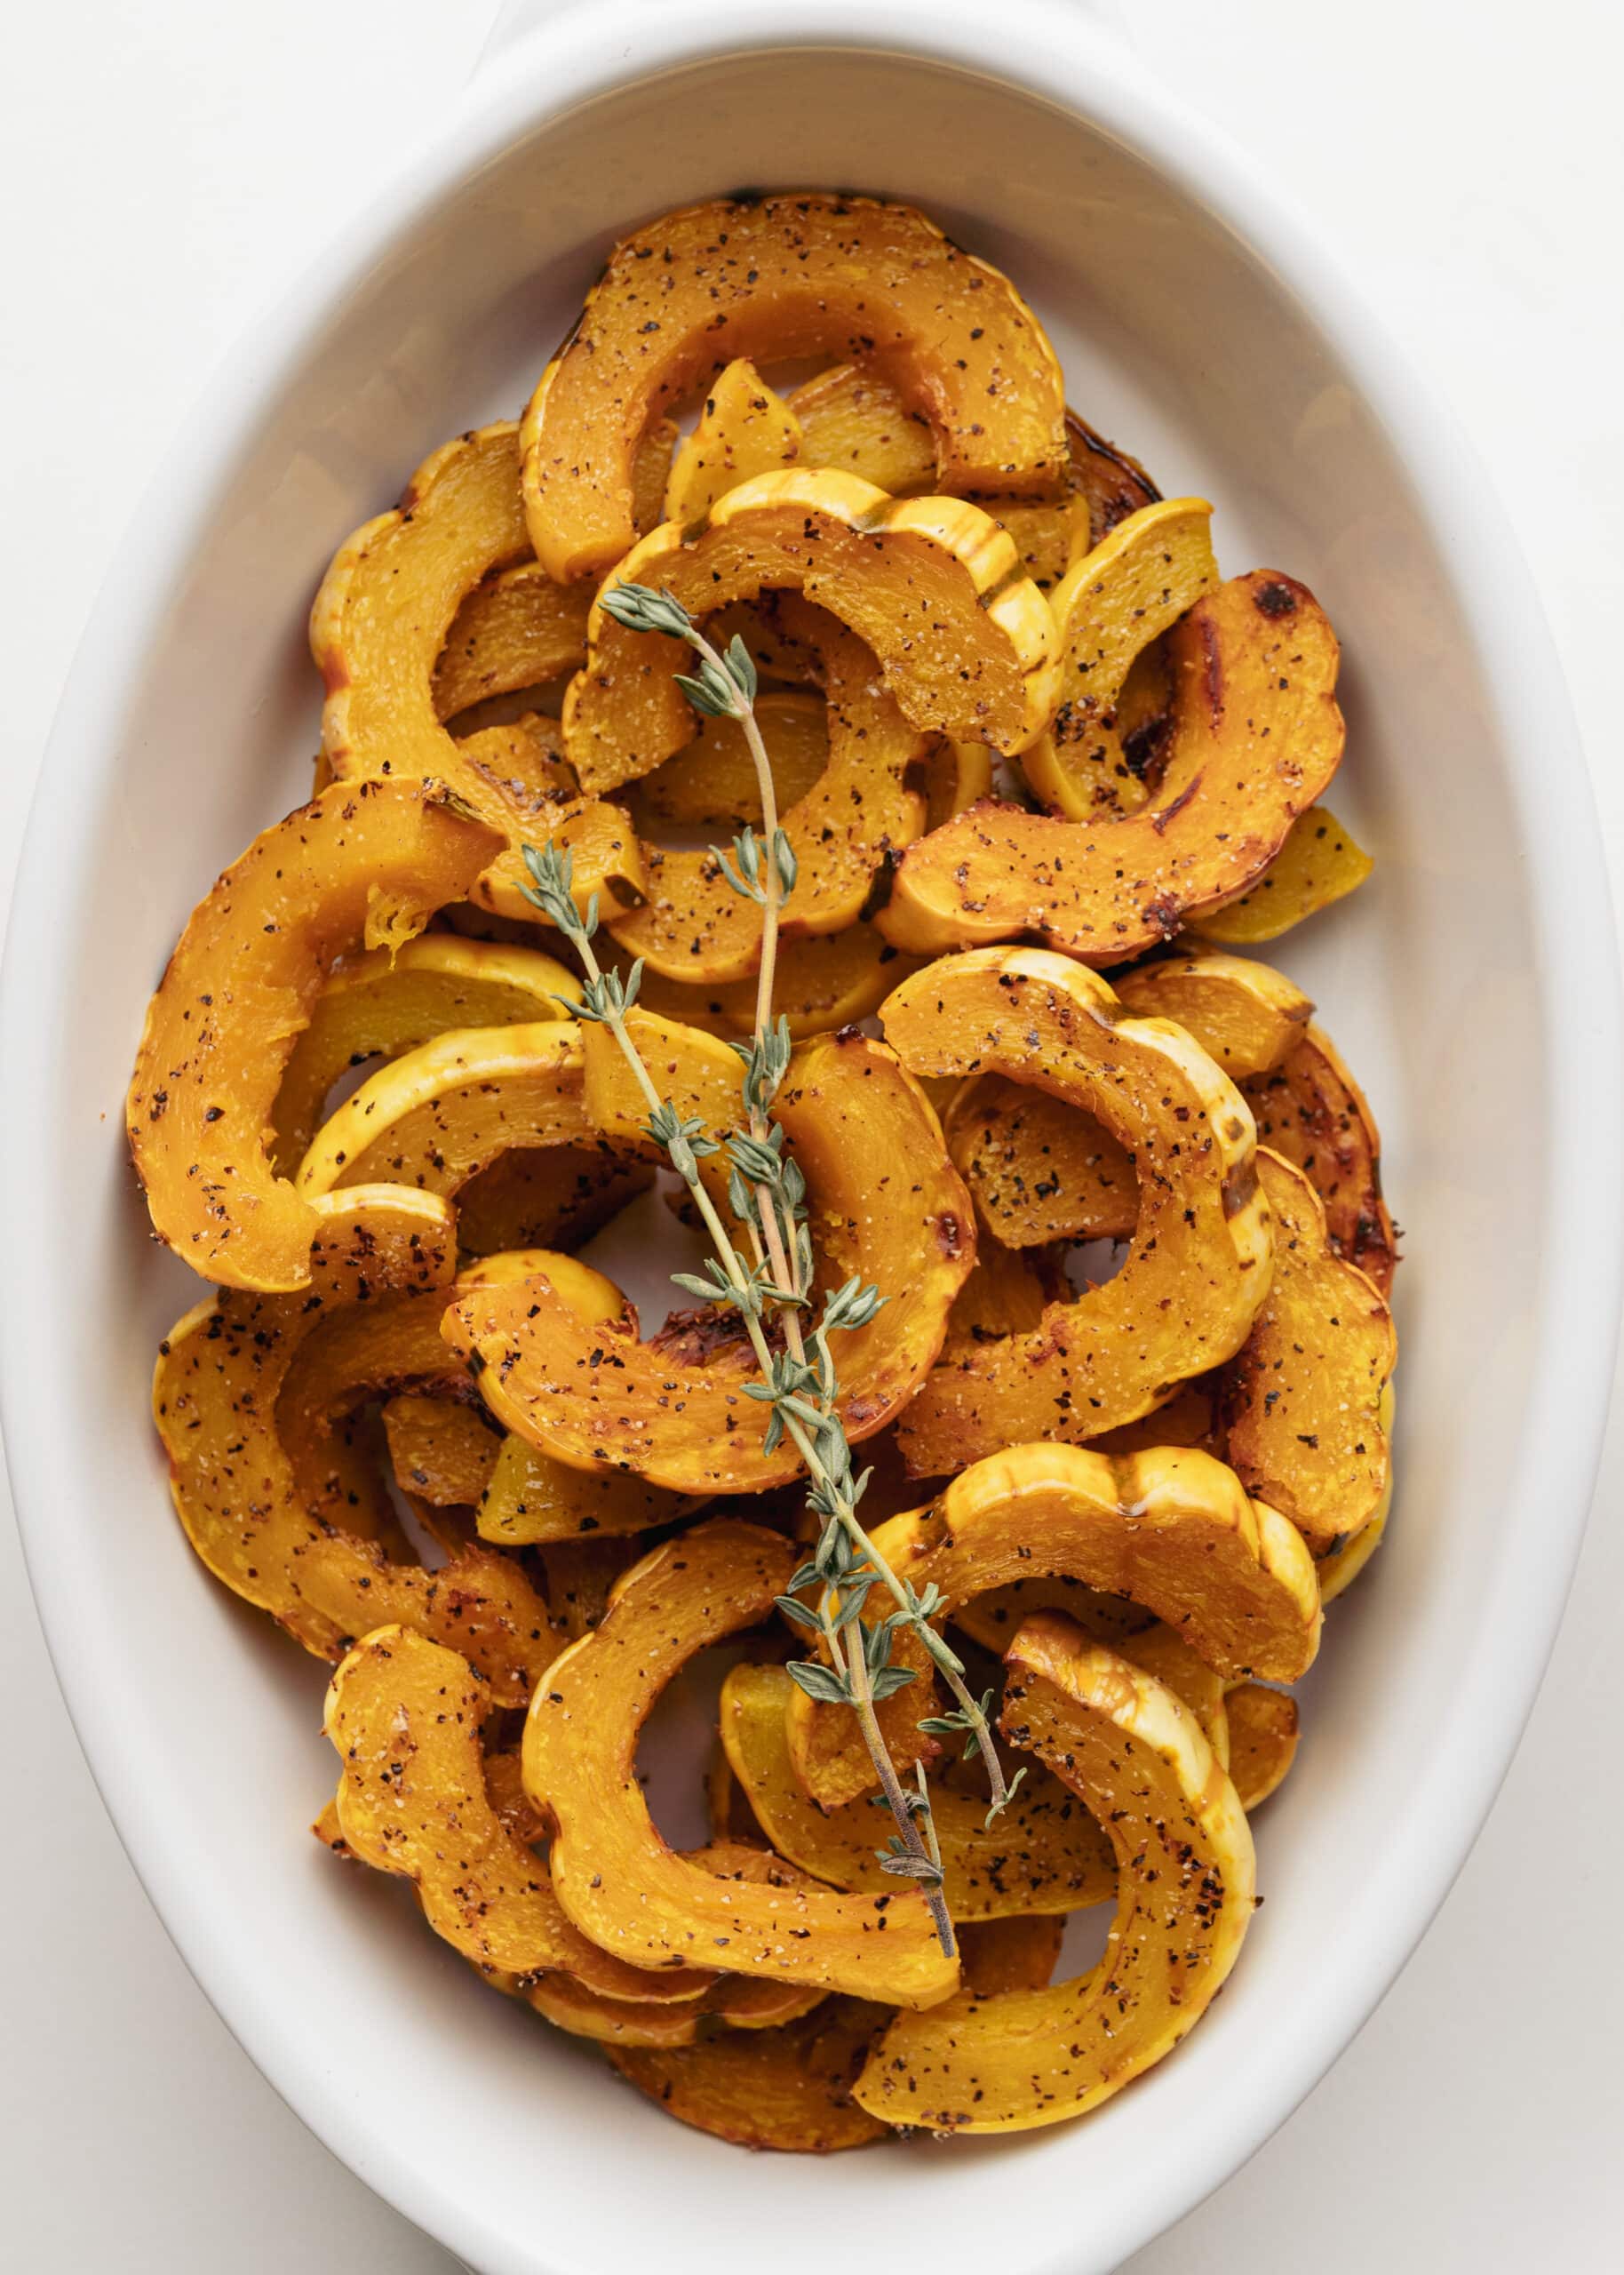 A large white oval dish with rings of delicata squash sprinkled with salt, pepper, and springs of fresh thyme in the center.